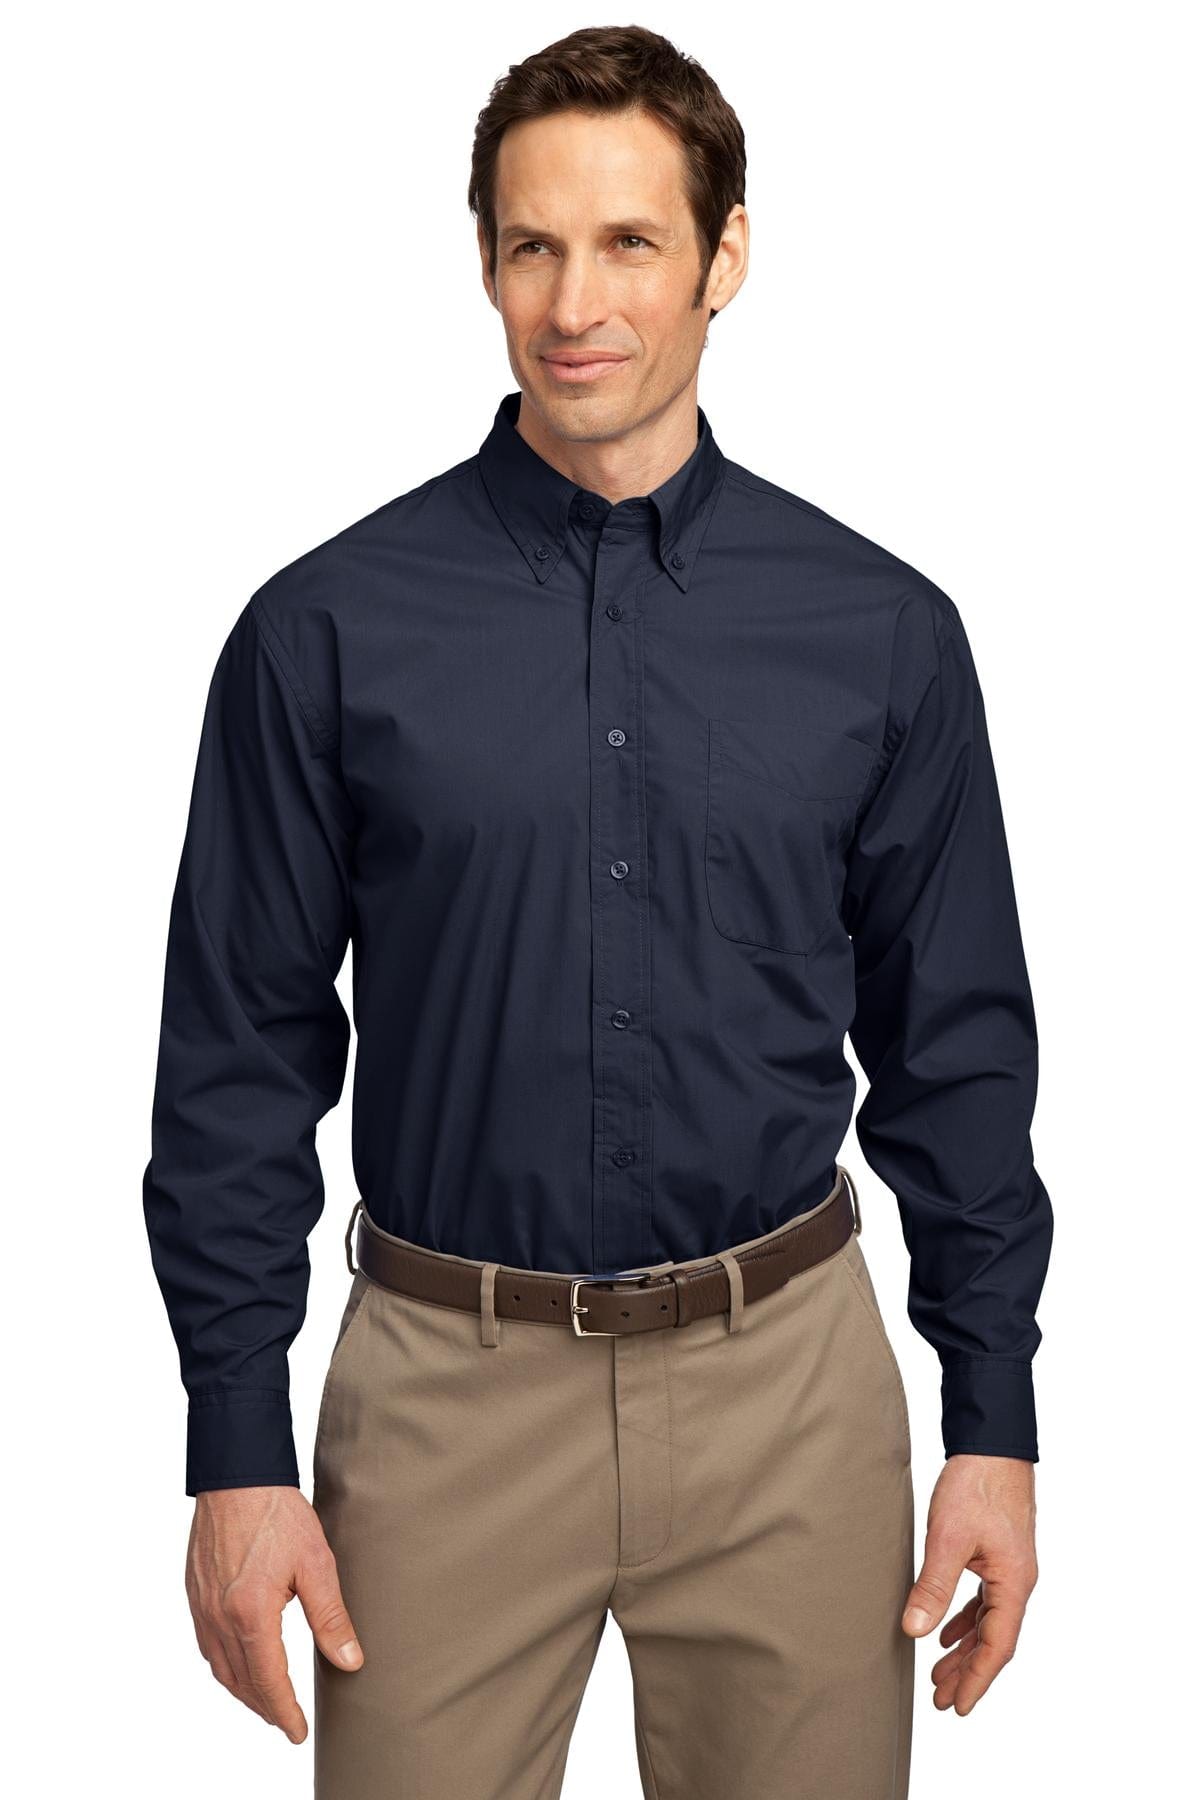 DISCONTINUED Port Authority ® Long Sleeve Easy Care, Soil Resistant Shirt. S607